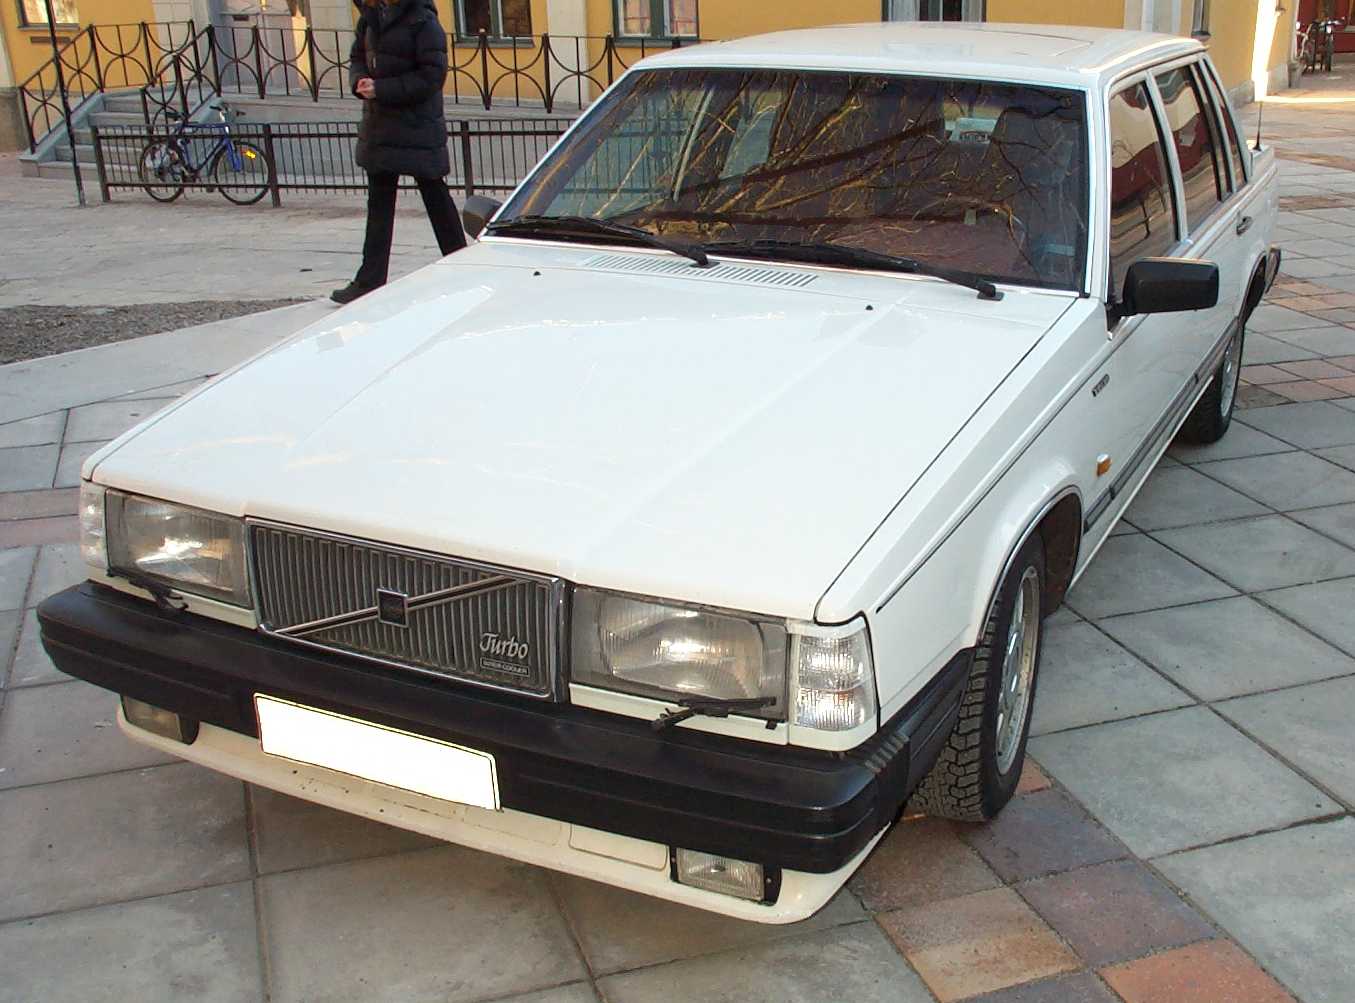 Volvo 760 Turbo Intercooler - huge collection of cars, auto news and reviews